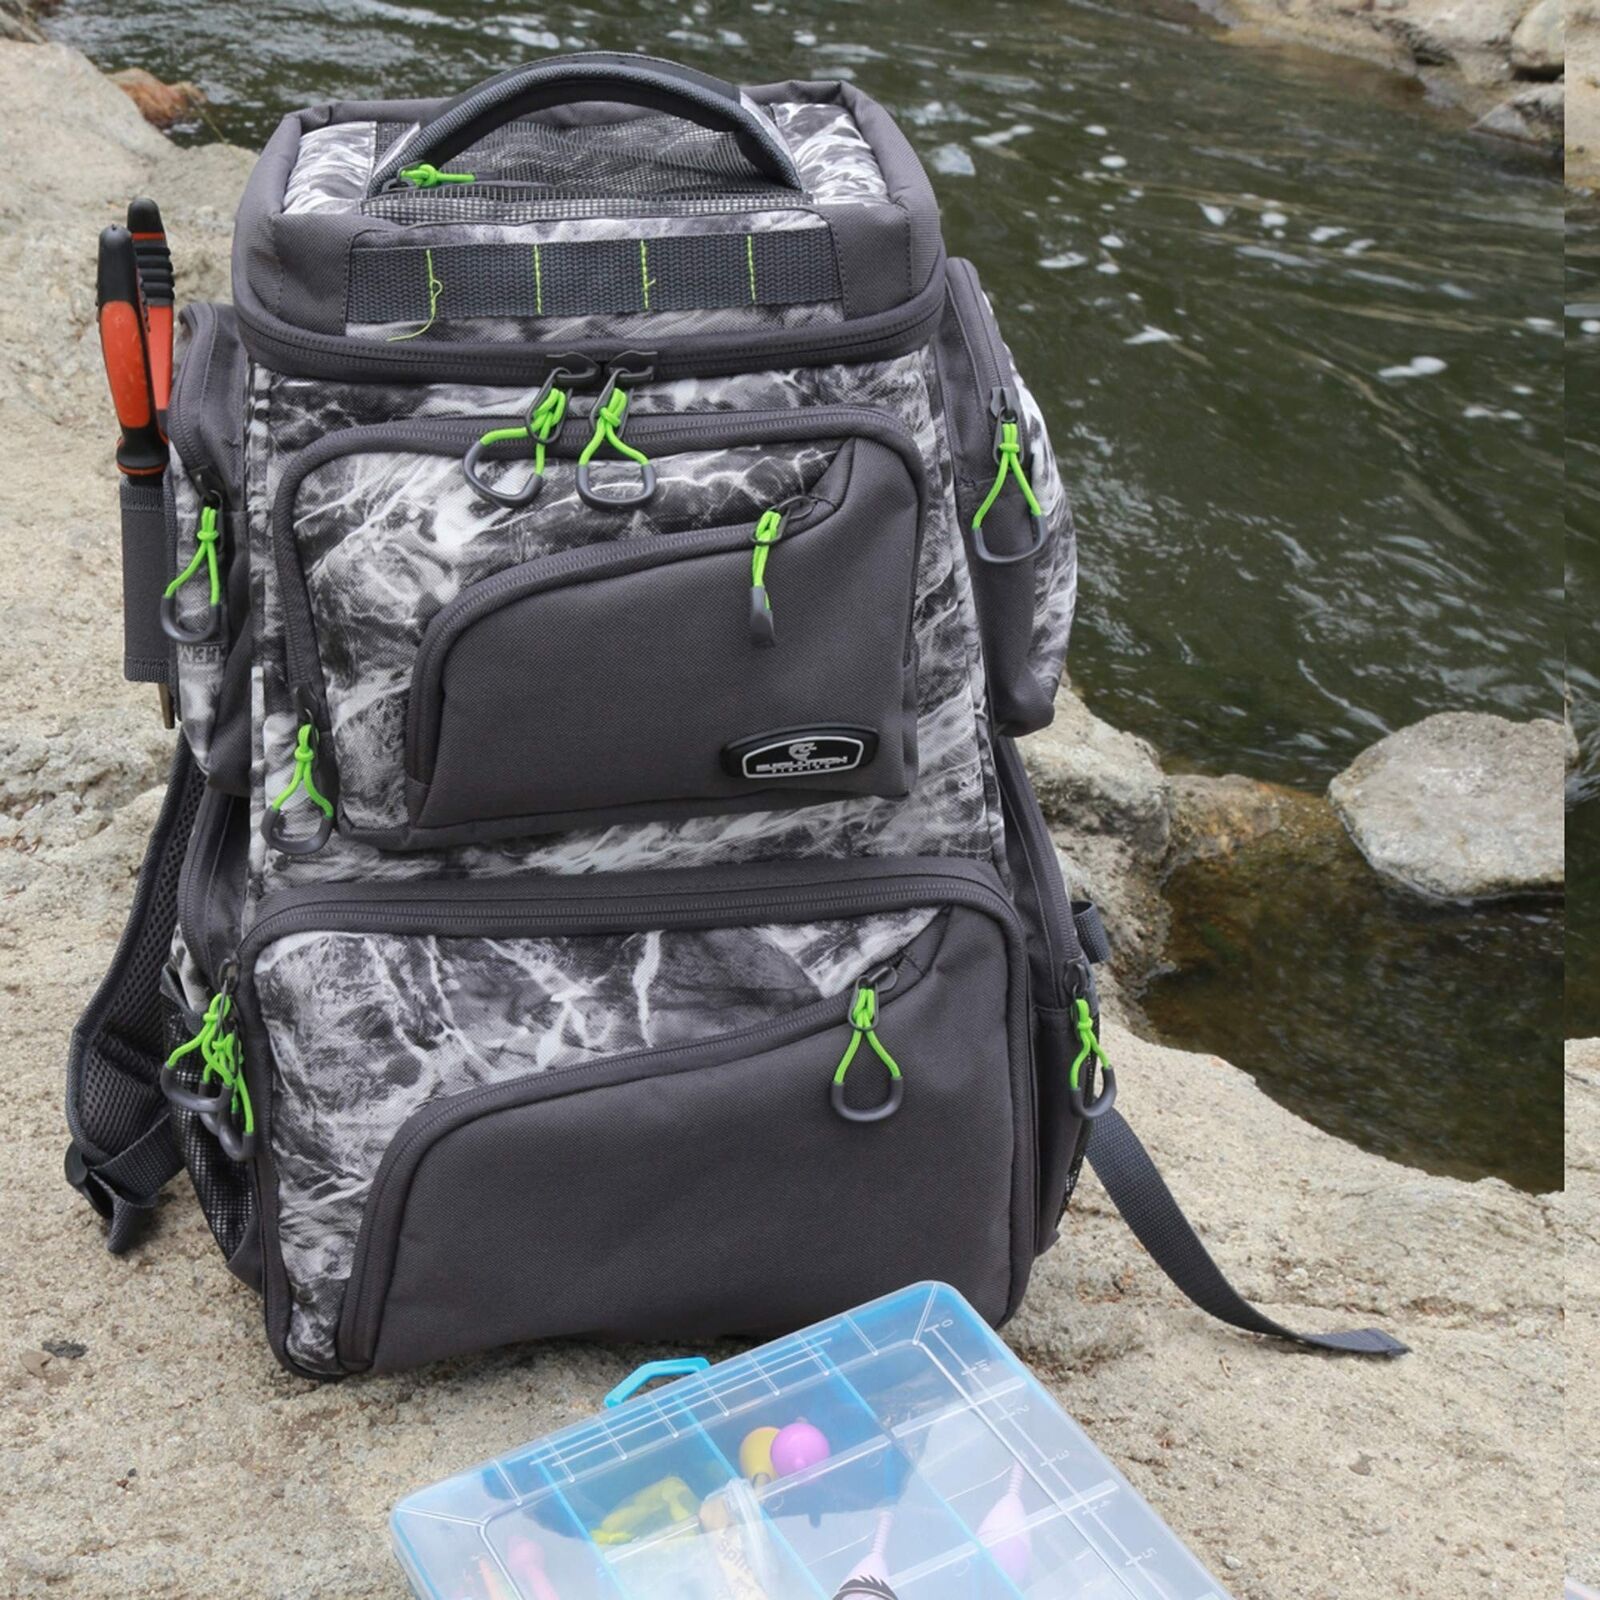  Evolution Fishing Largemouth Double Decker 3600 Tackle Backpack  - Water Camouflage, Outdoor Rucksack w/ 3 Fishing Trays, Padded Handle, Fishing  Backpack, Tackle Storage : Sports & Outdoors